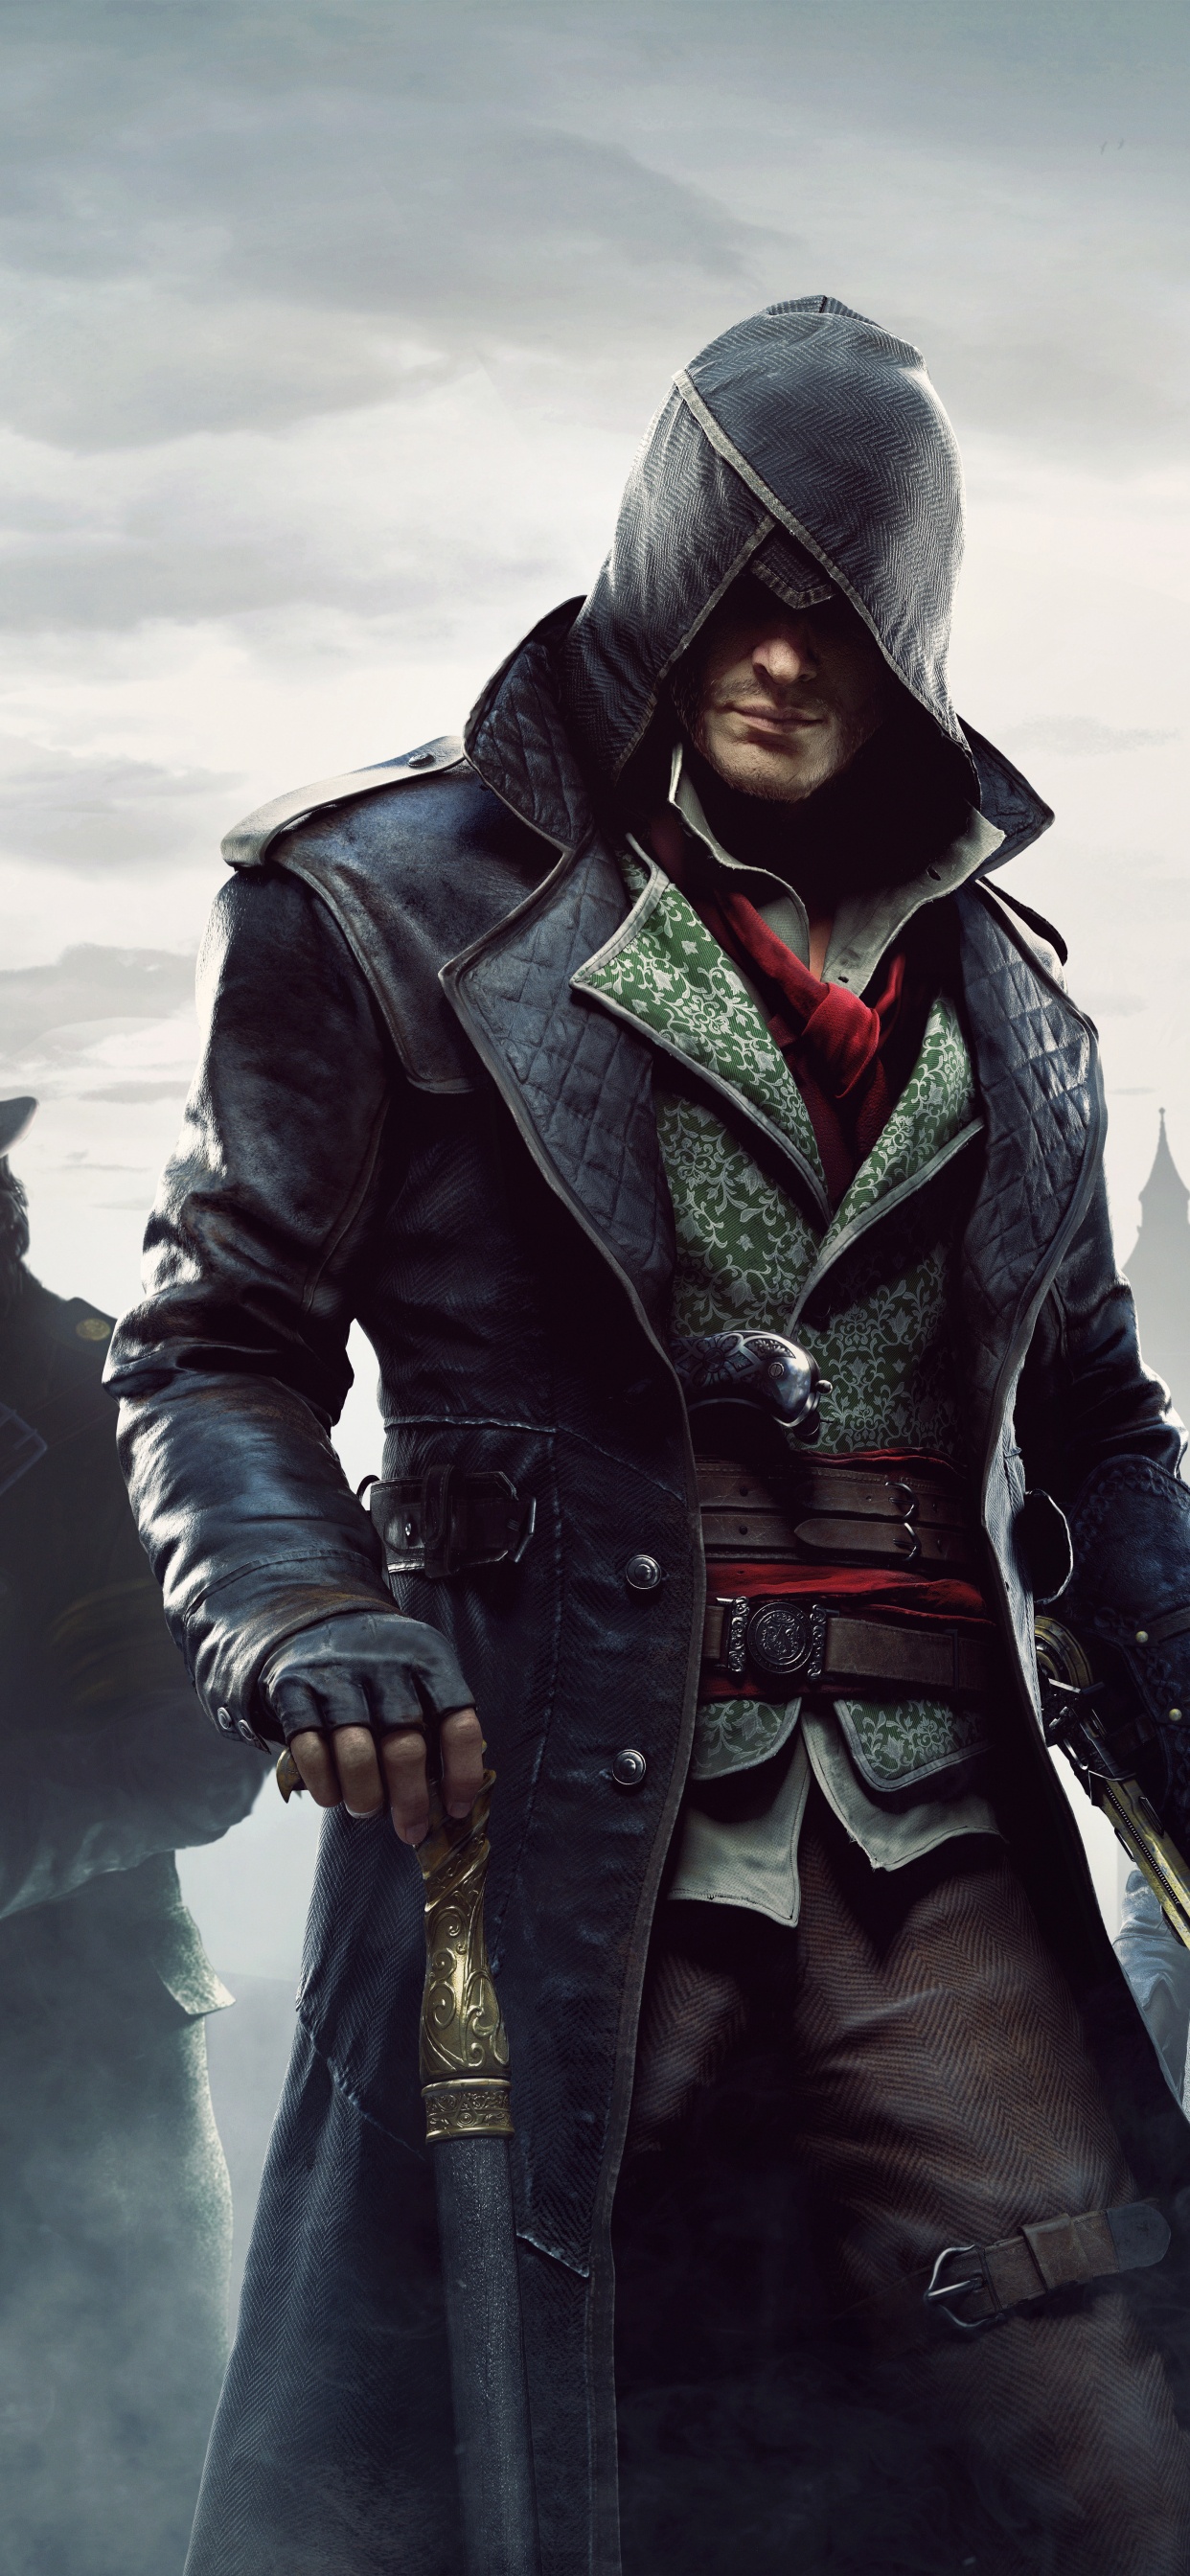 Assassins Creed Syndicate, Ubisoft, Pc-Spiel, Film, Assassins Creed Unity. Wallpaper in 1242x2688 Resolution